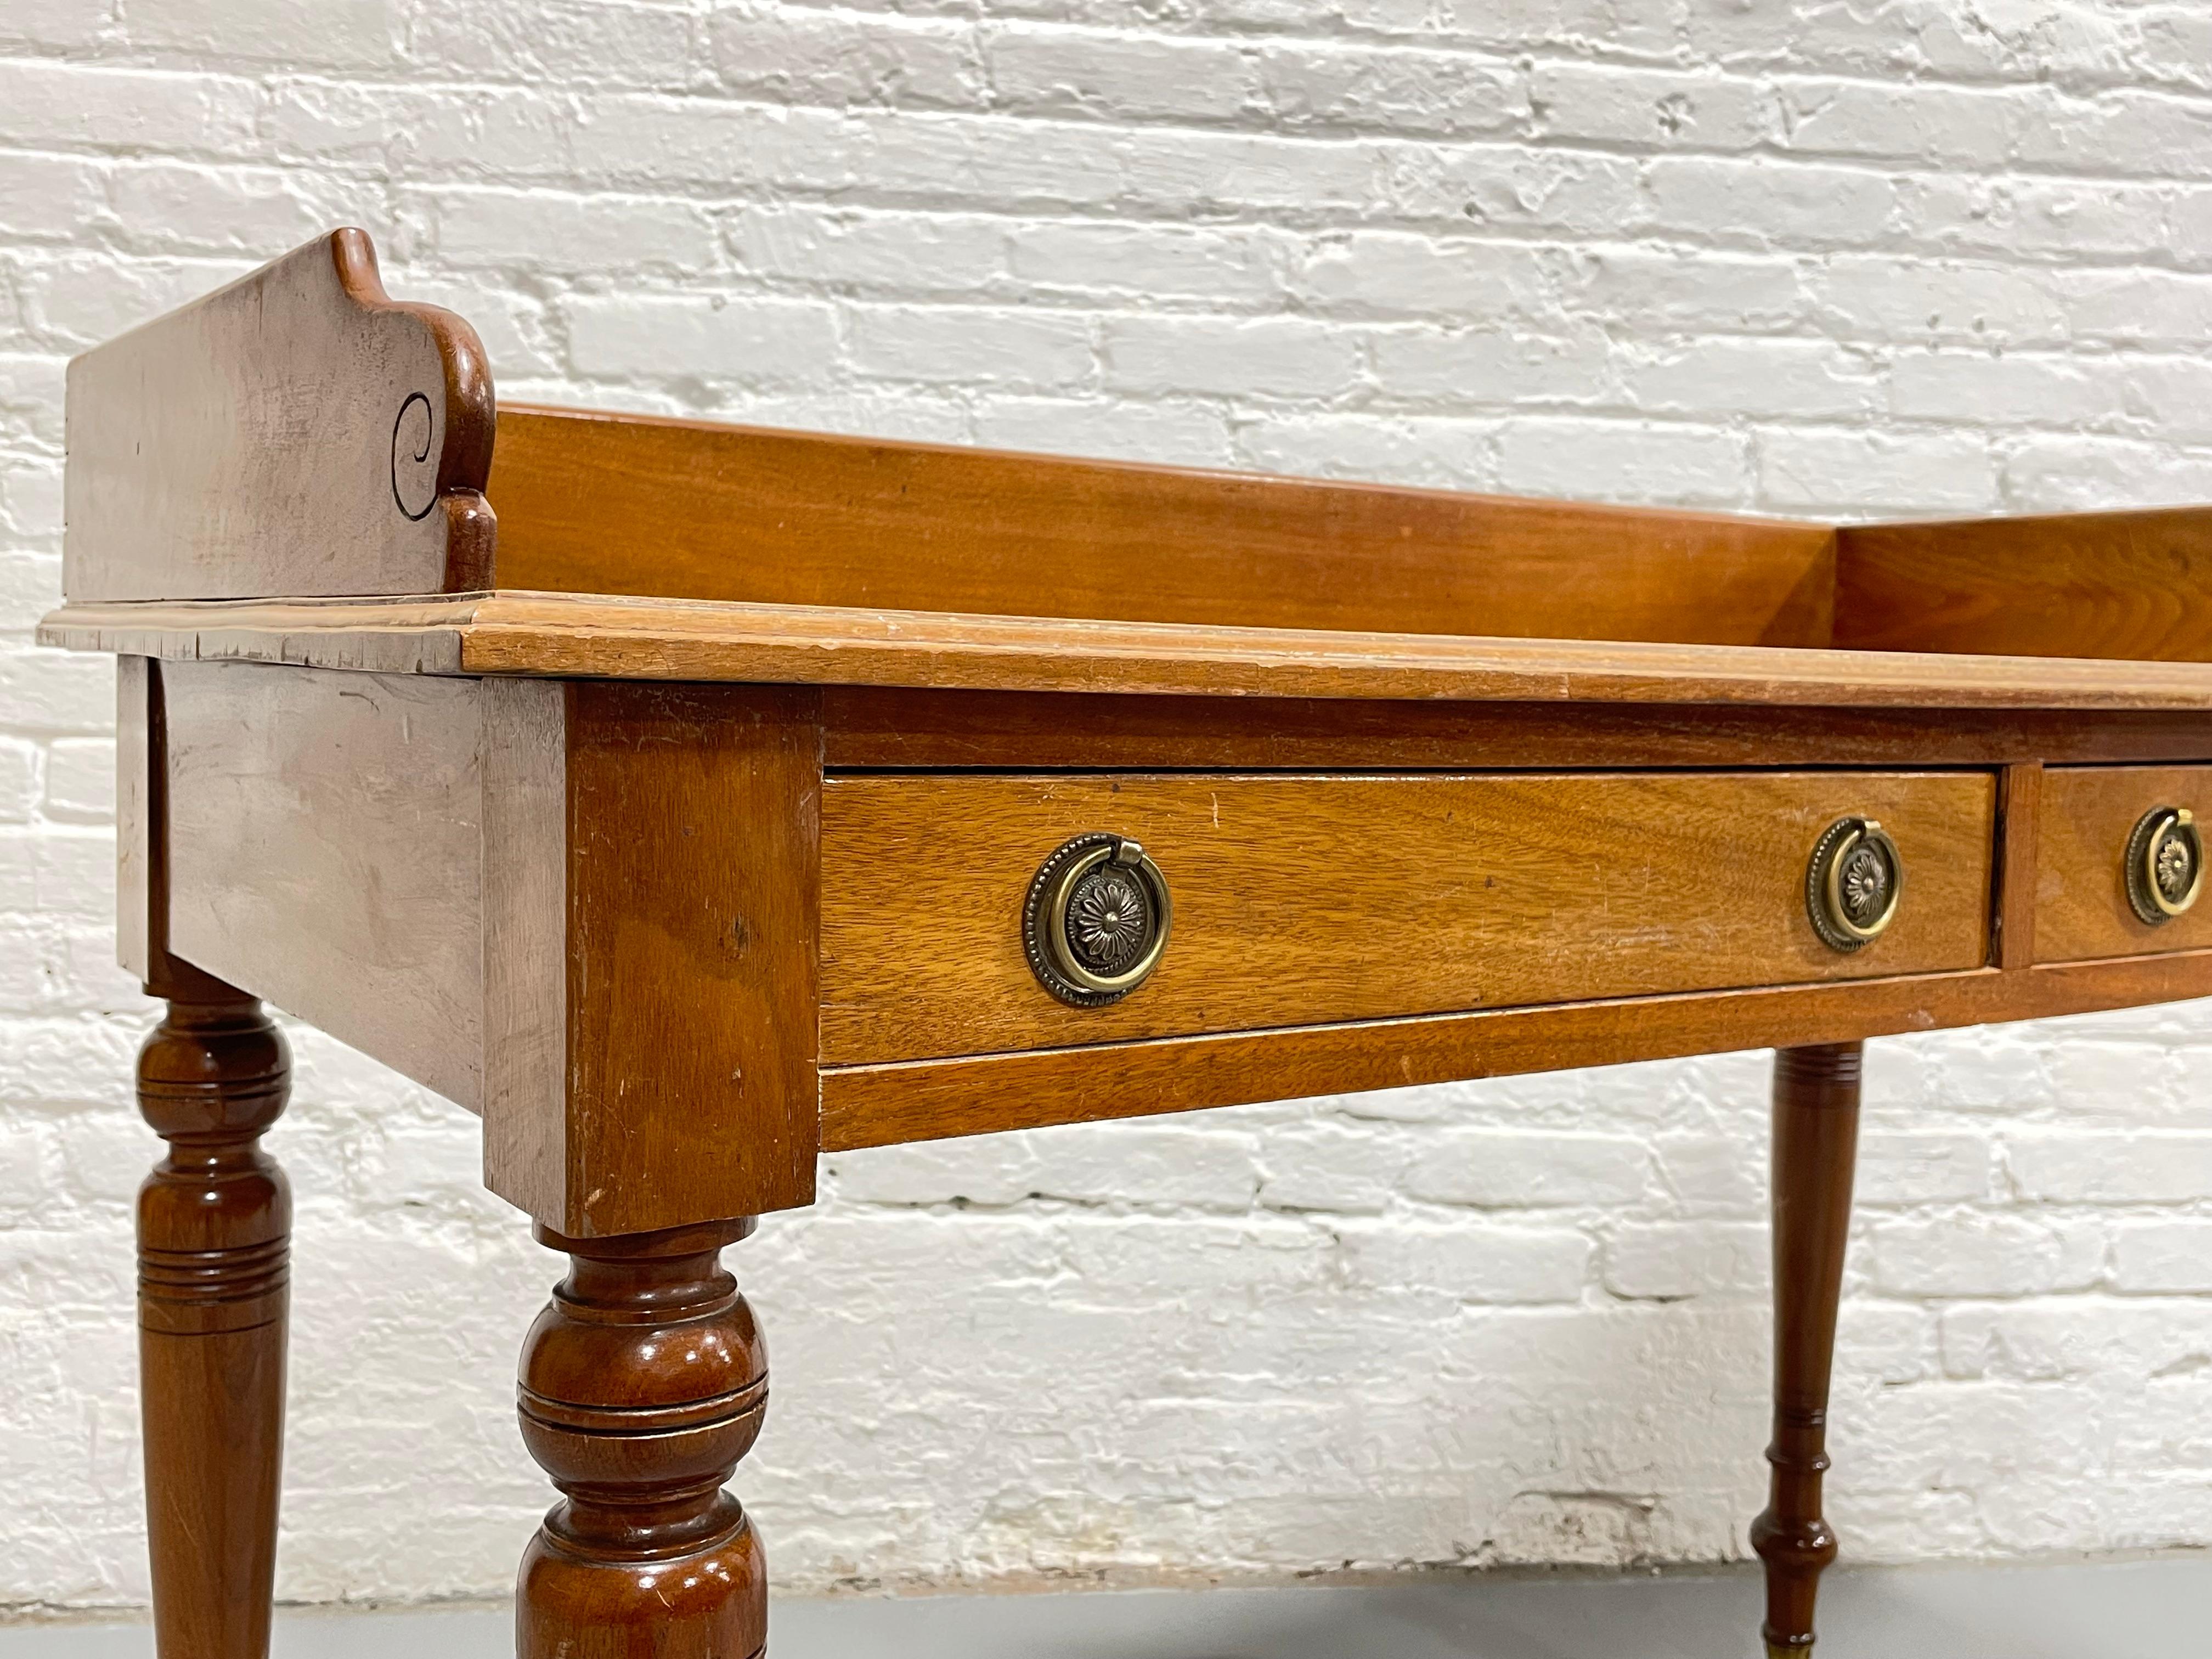 Antique Mahogany Writing Table / Server Turned Legs Wheels, c. 1890 In Fair Condition For Sale In Weehawken, NJ